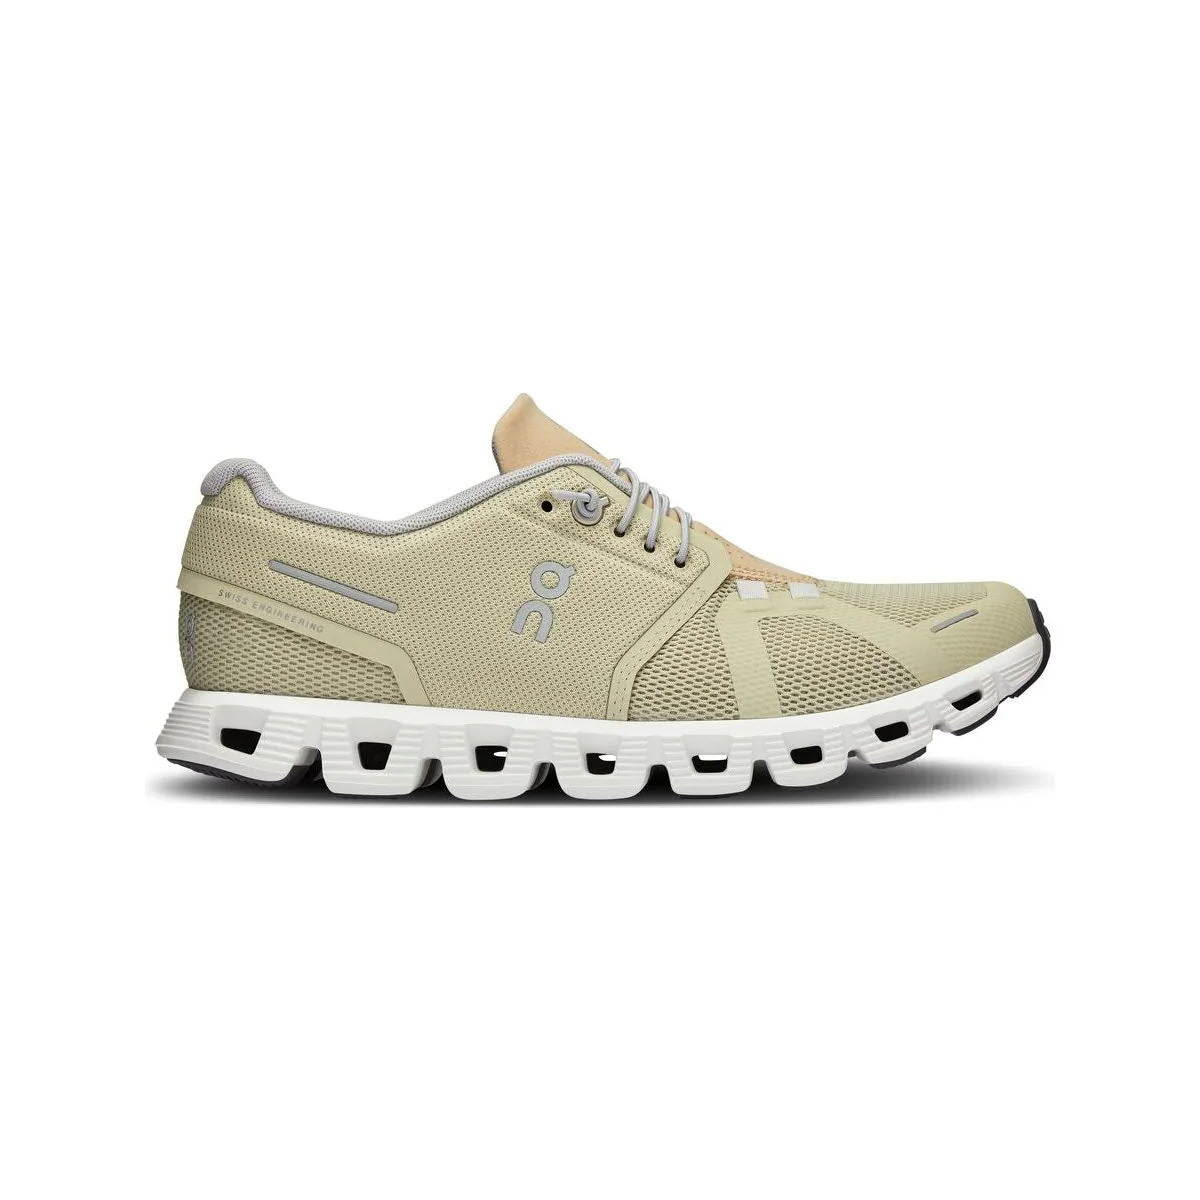 A single ON CLOUD 5 HAZE/SAND - WOMENS athletic shoe with a white sole and laces, designed for improved fit, displayed on a white background.